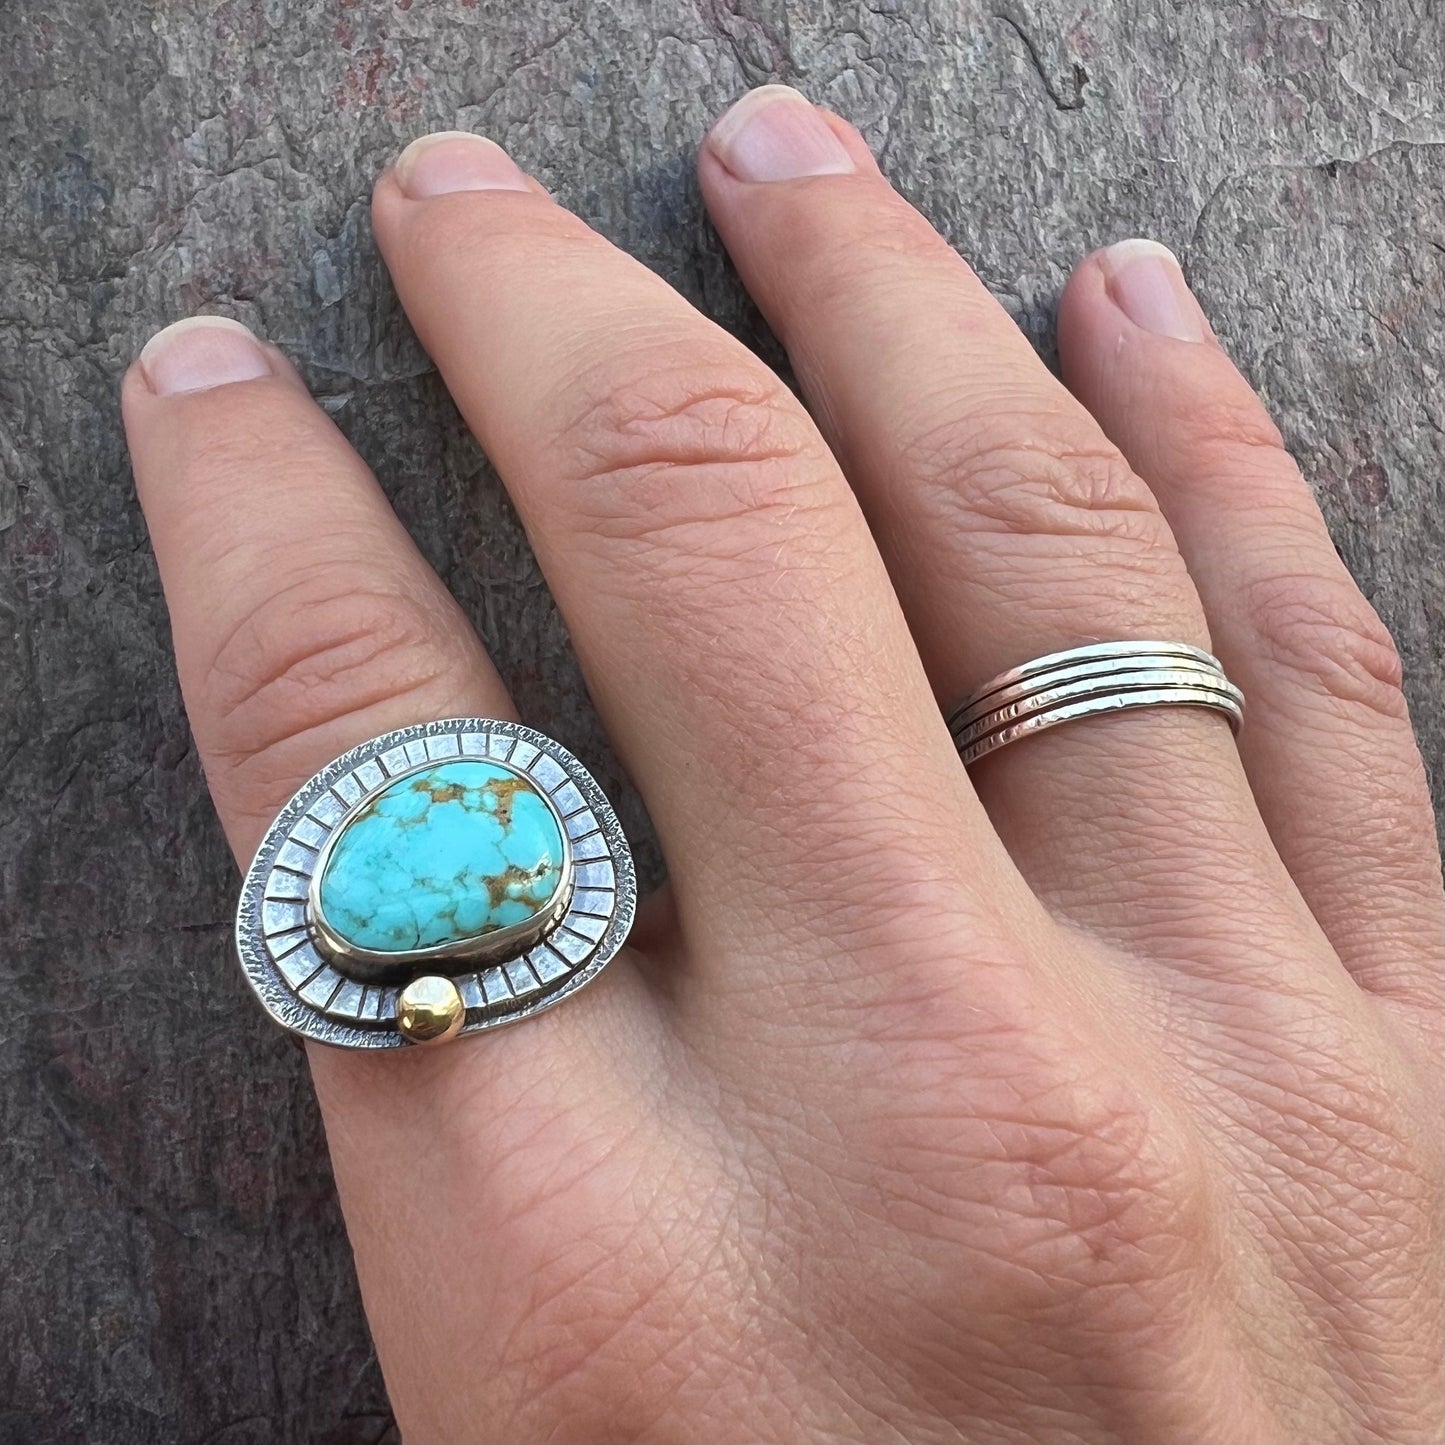 Royston Turquoise Sterling Silver Ring - One-of-a-kind Handmade Freeform Turquoise and Sterling Silver Ring - Size 10